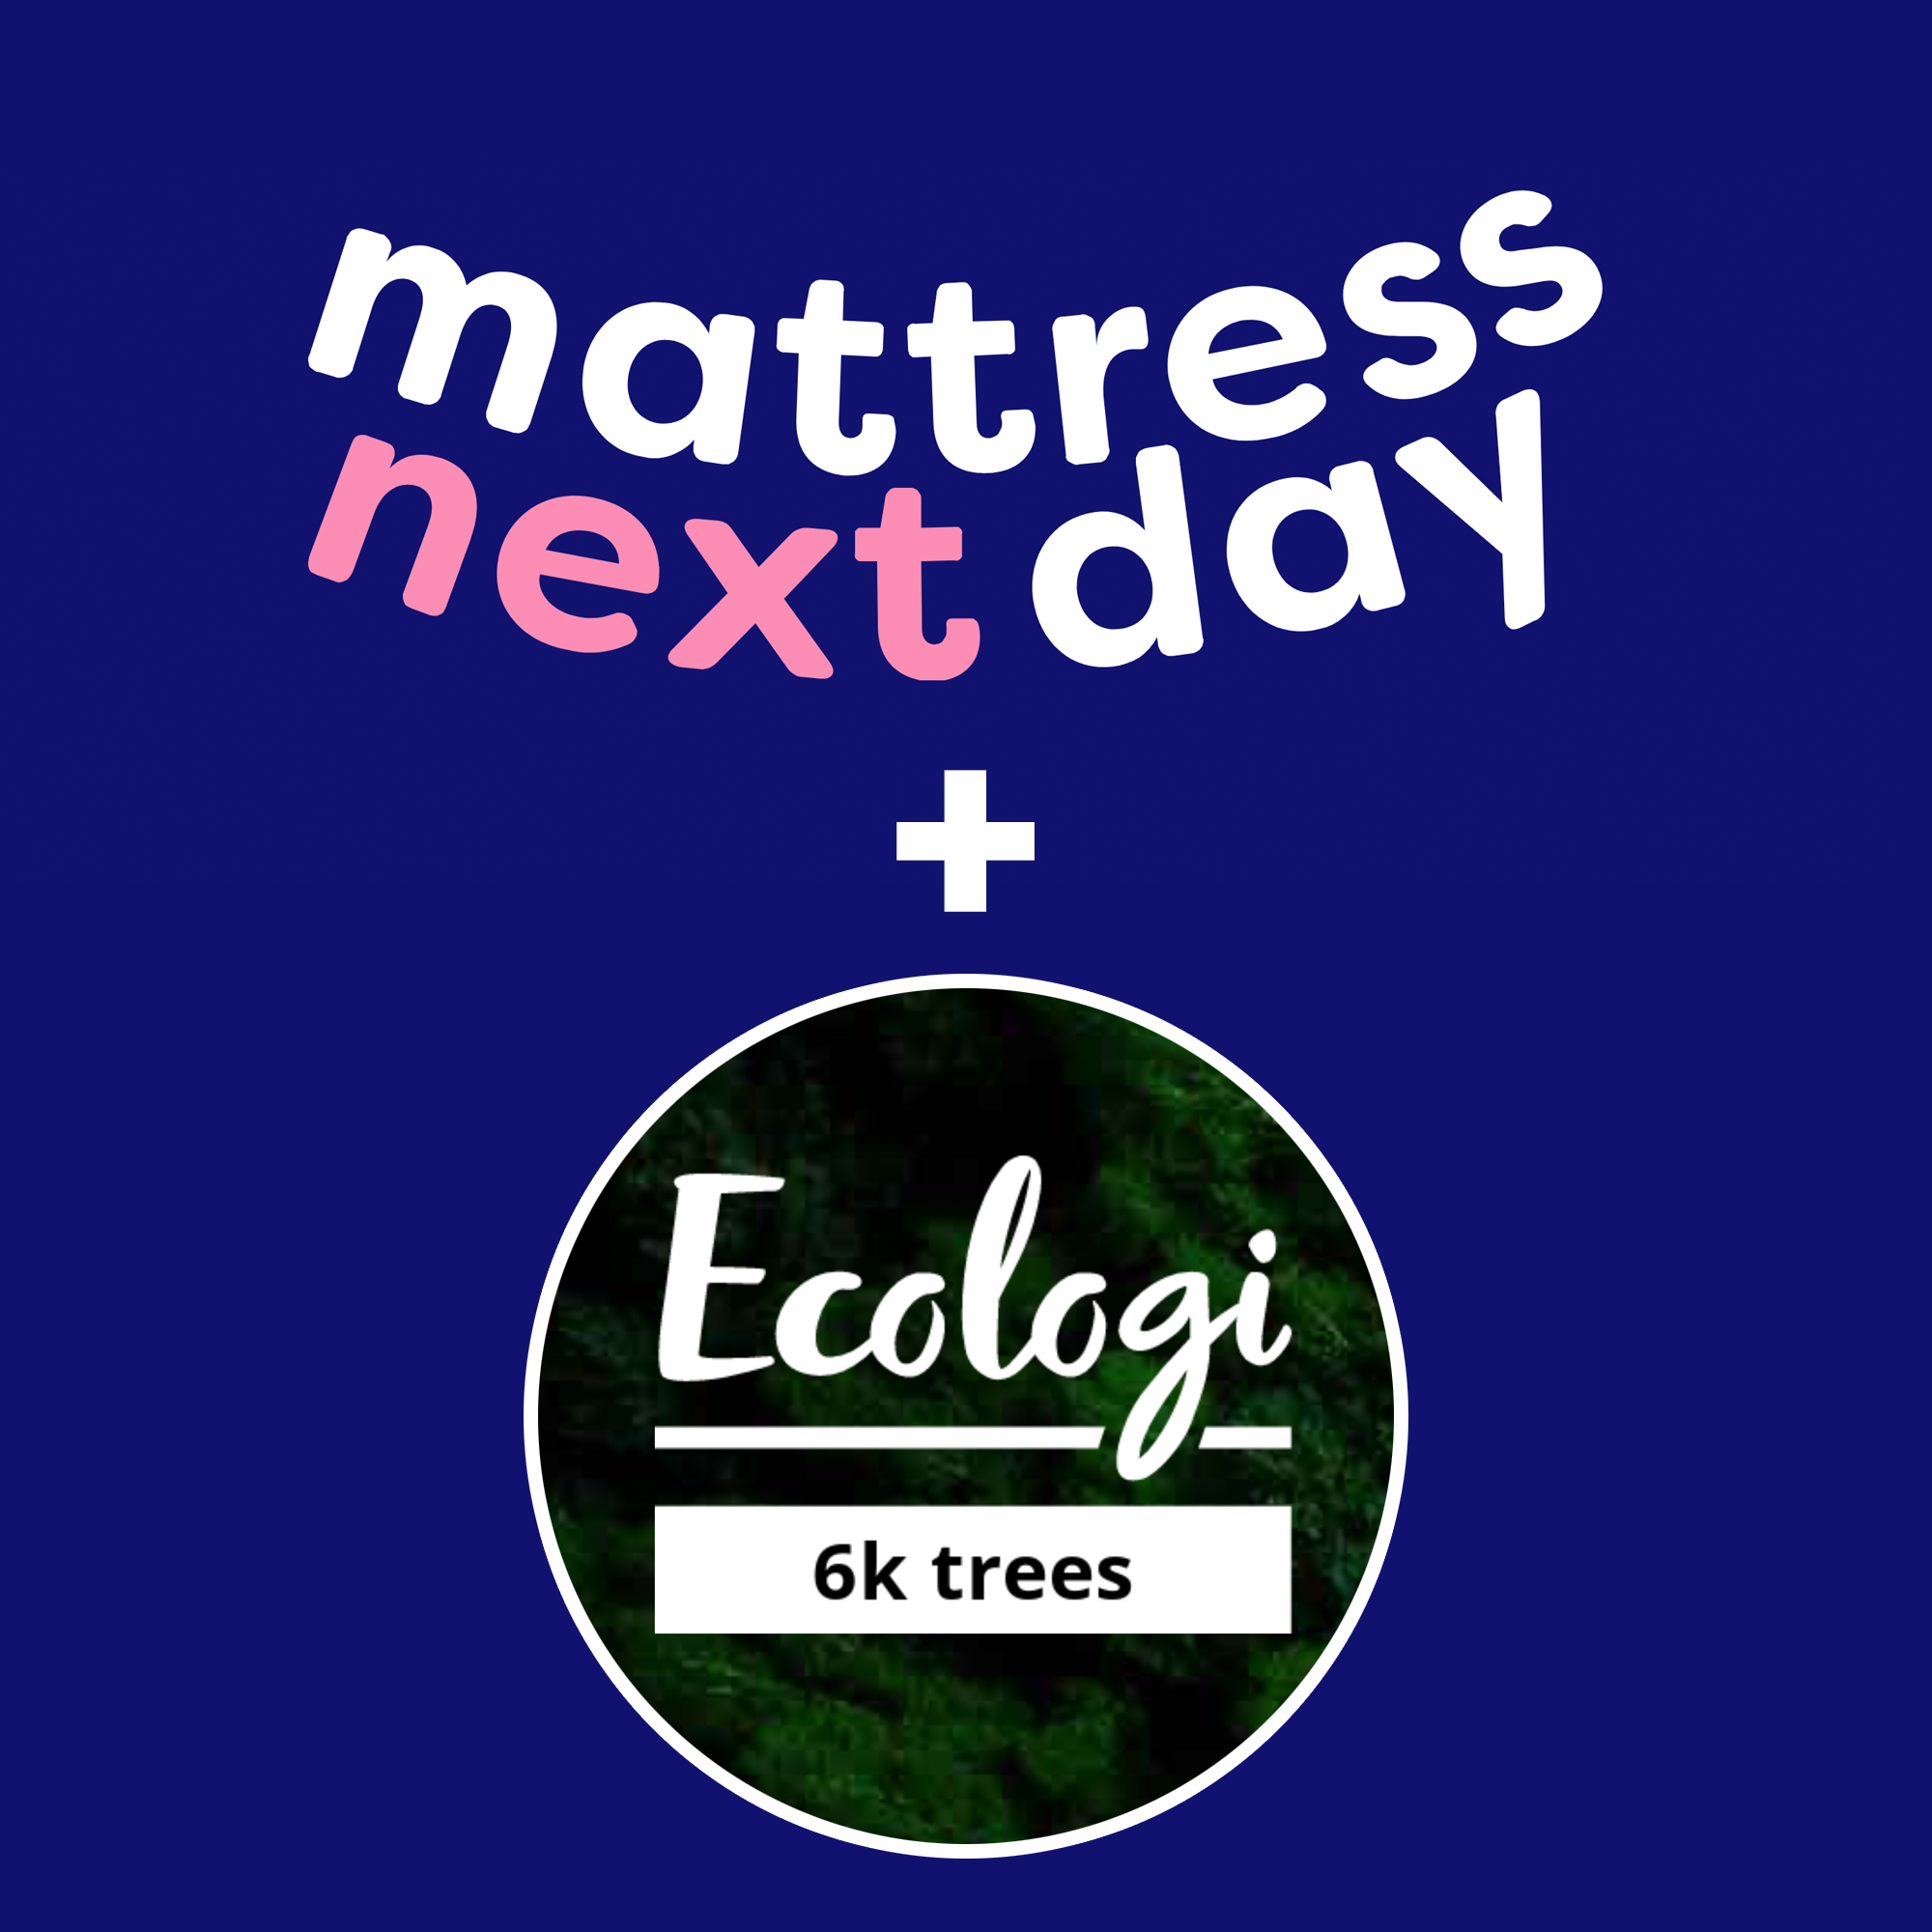 MattressNextDay rebrands and looks to a more environmental future